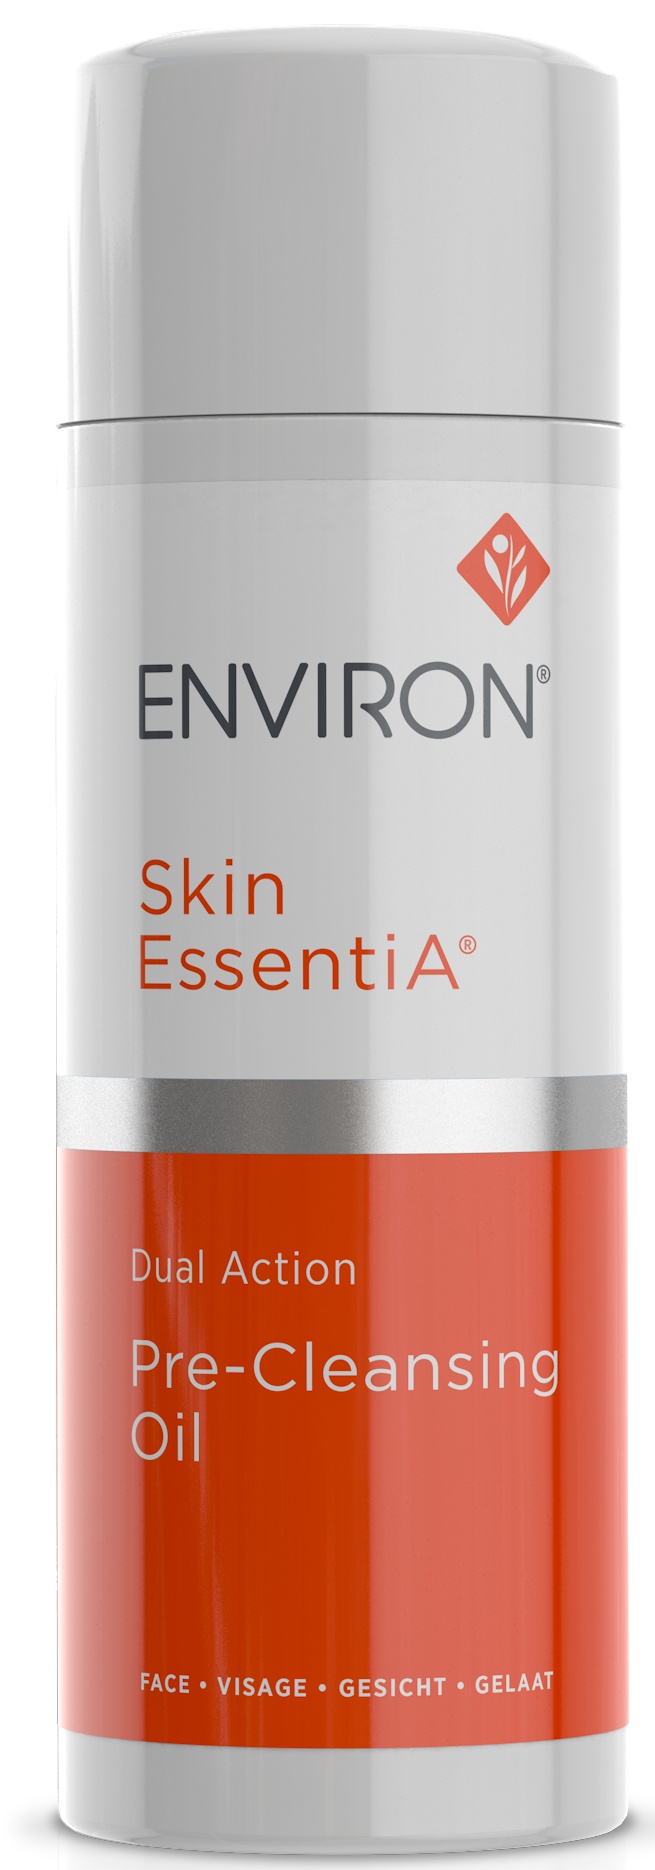 Environ Dual Action Pre-cleansing Oil